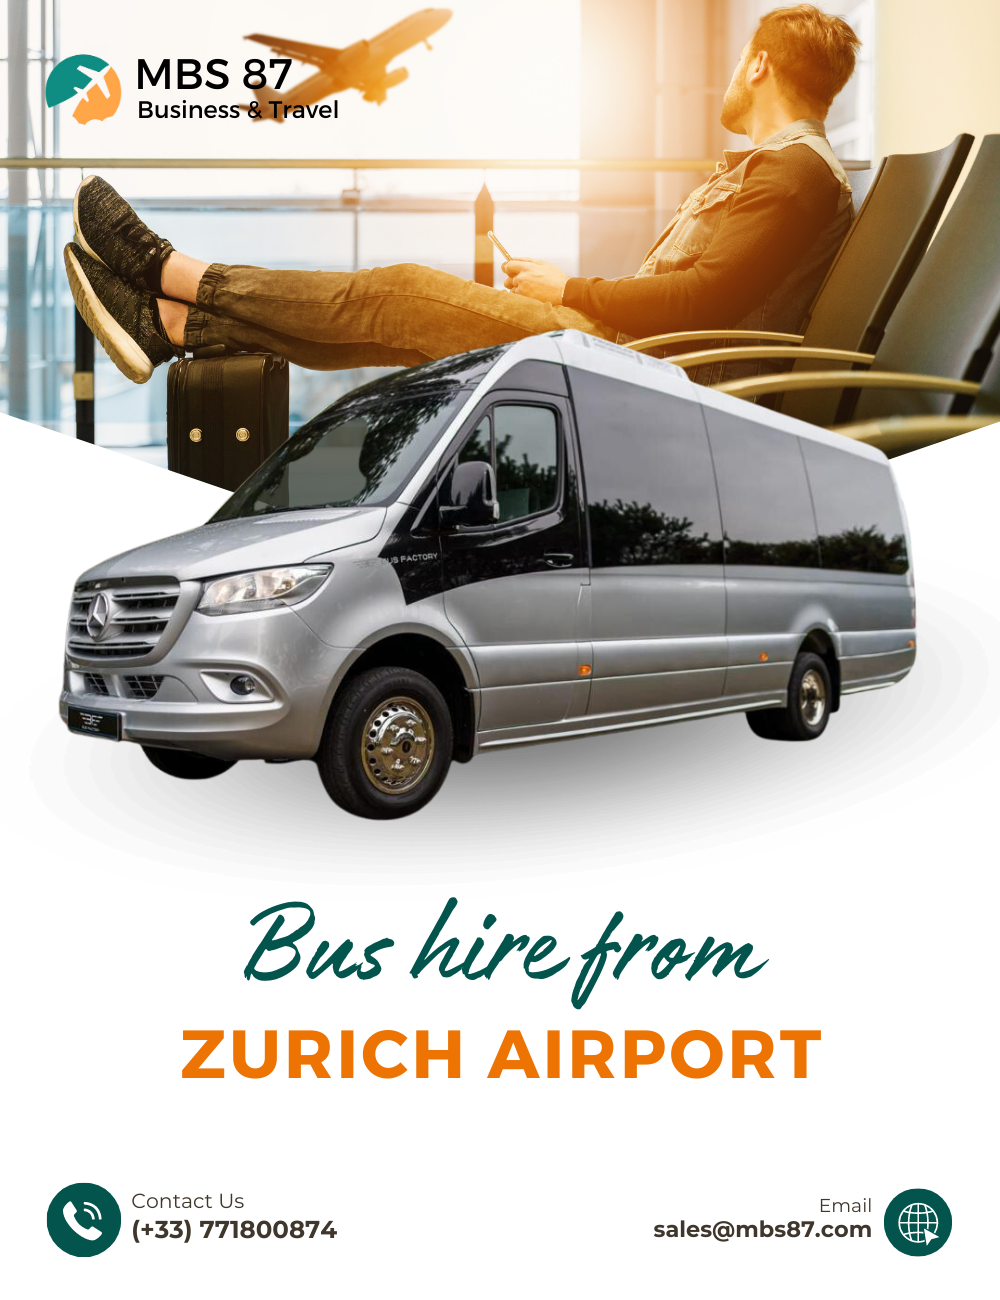 Experience a Hassle-free Airport Transfer Service in Zurich with MBS87 Store